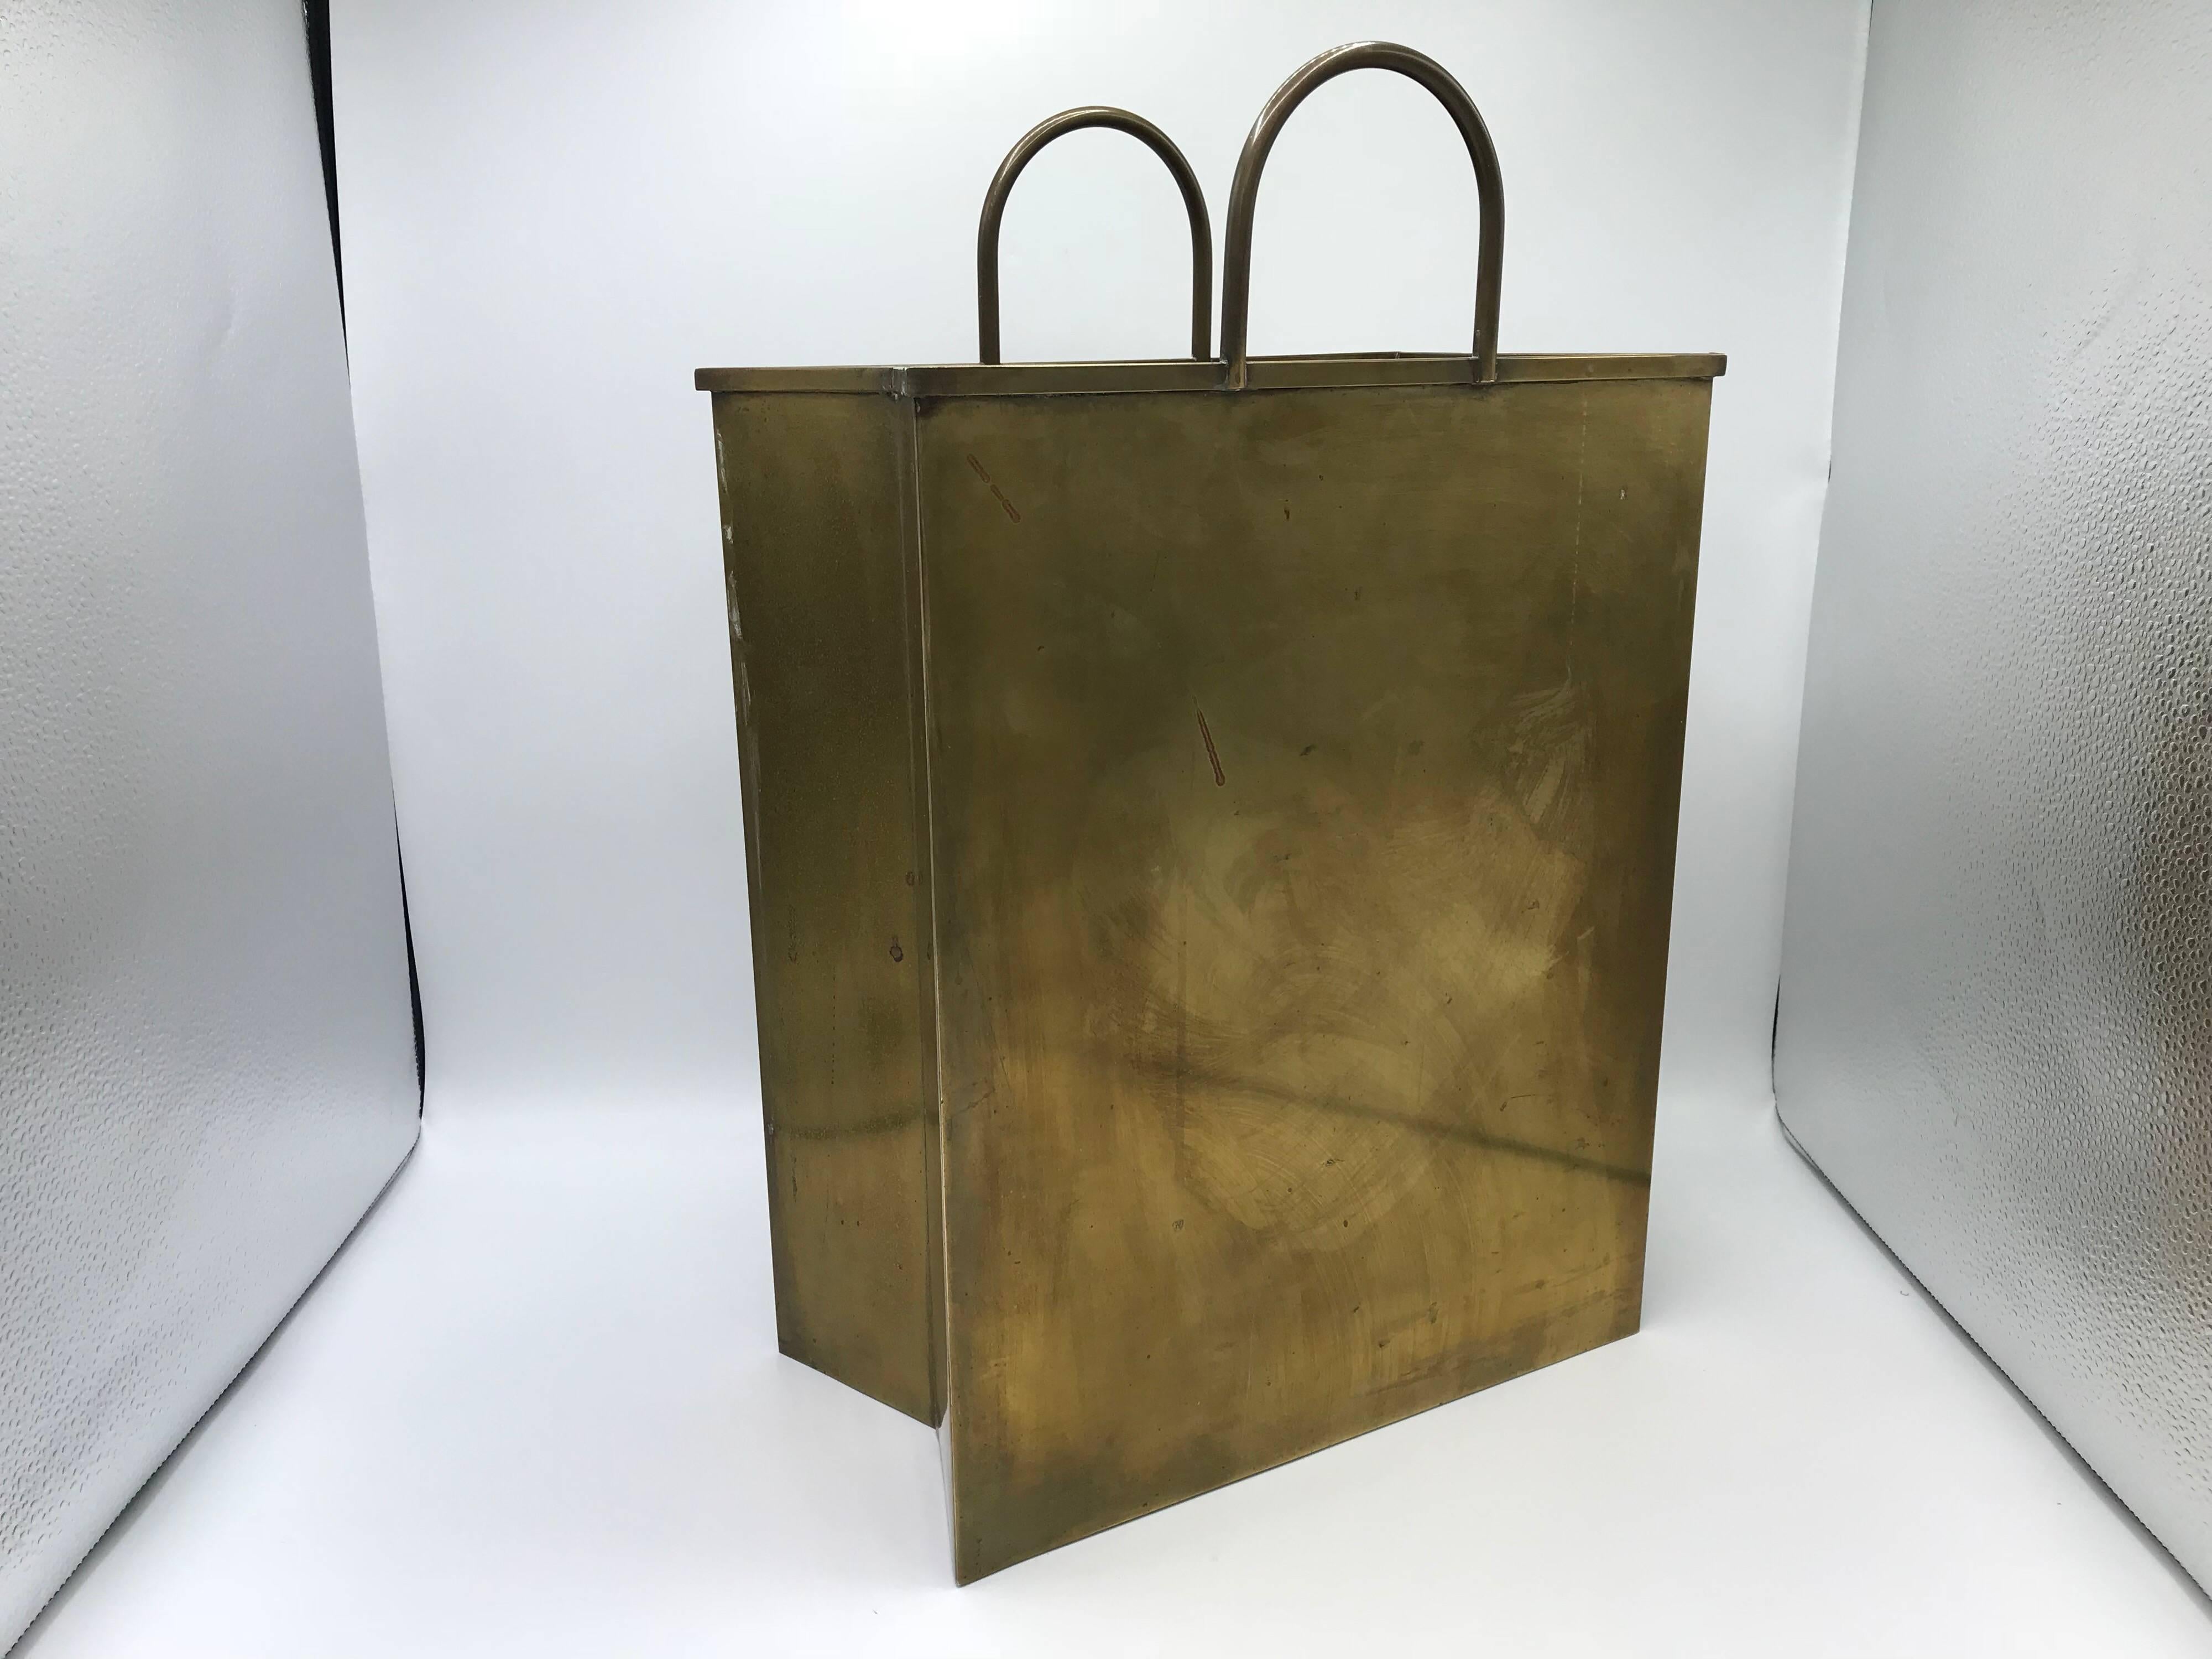 Offered is a fabulous, large 1960s Italian Sarreid Ltd. brass shopping bag cachepot planter. The piece is perfect as a wastebin or umbrella stand! Marked ‘Made in Italy’ on underside, see last photo.